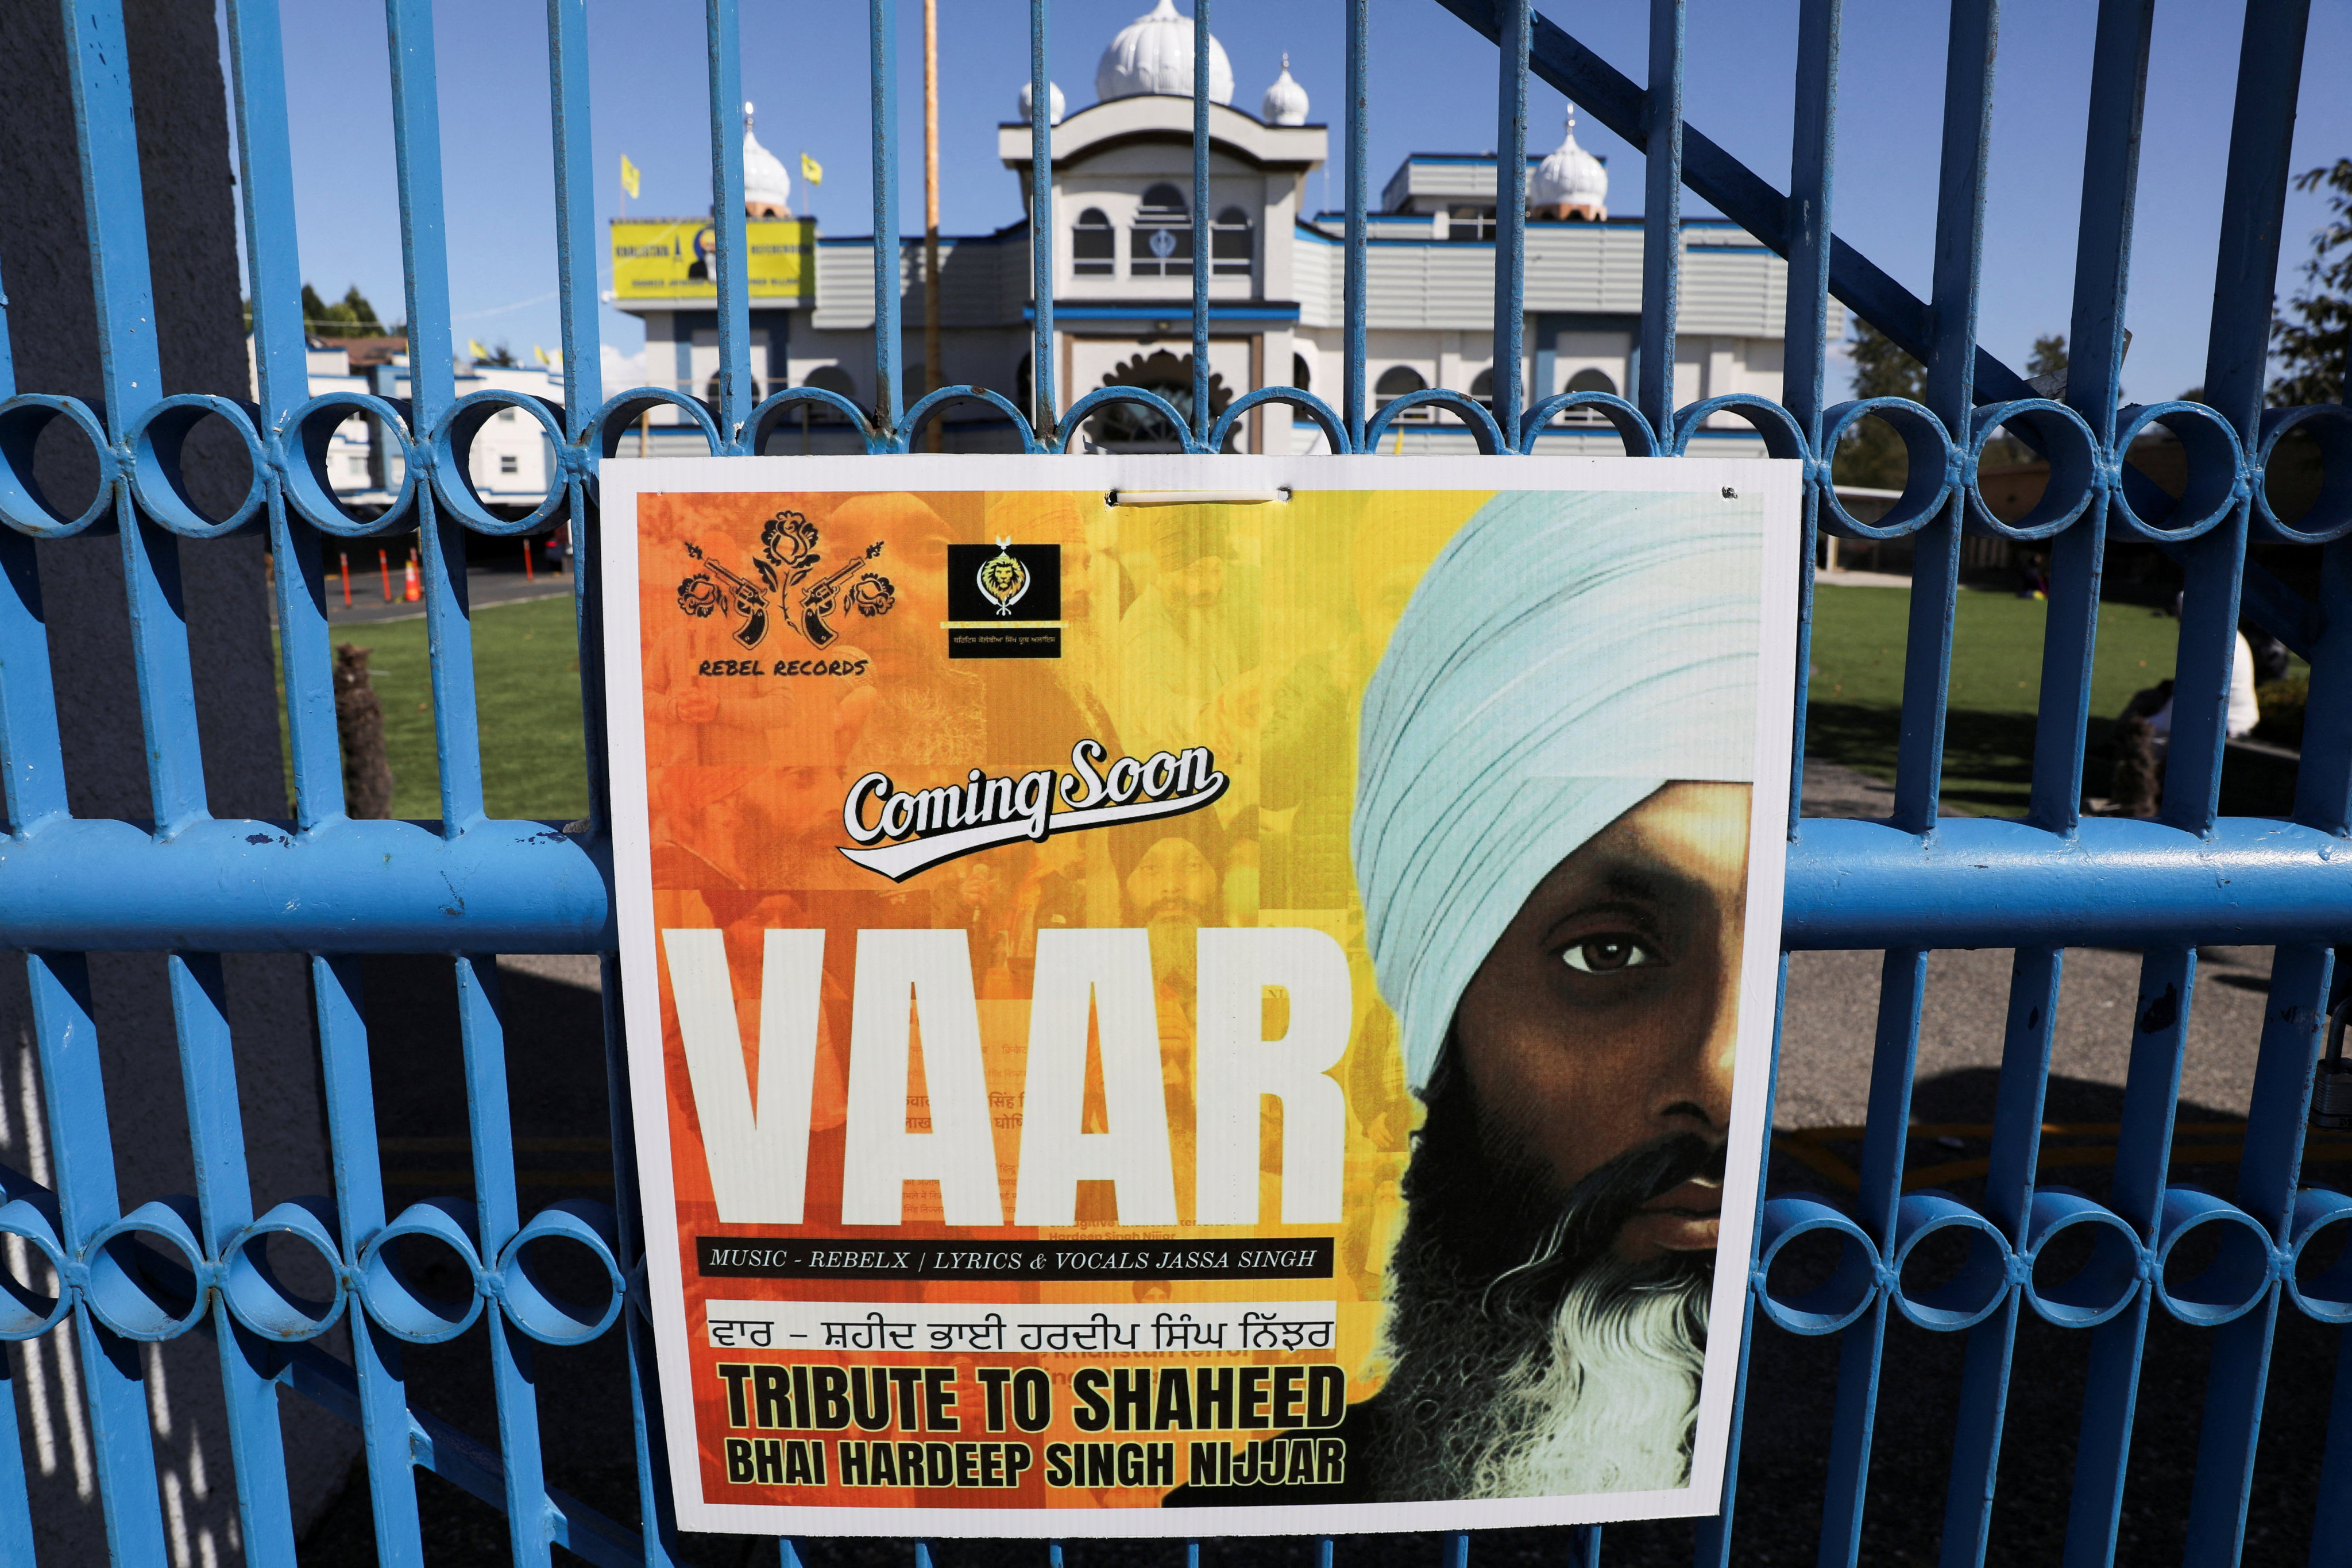 A sign outside the Guru Nanak Sikh Gurdwara temple is seen on Tuesday after the killing on its grounds of Sikh leader Hardeep Singh Nijjar in Surrey, British Columbia, Canada. Photo: Reuters